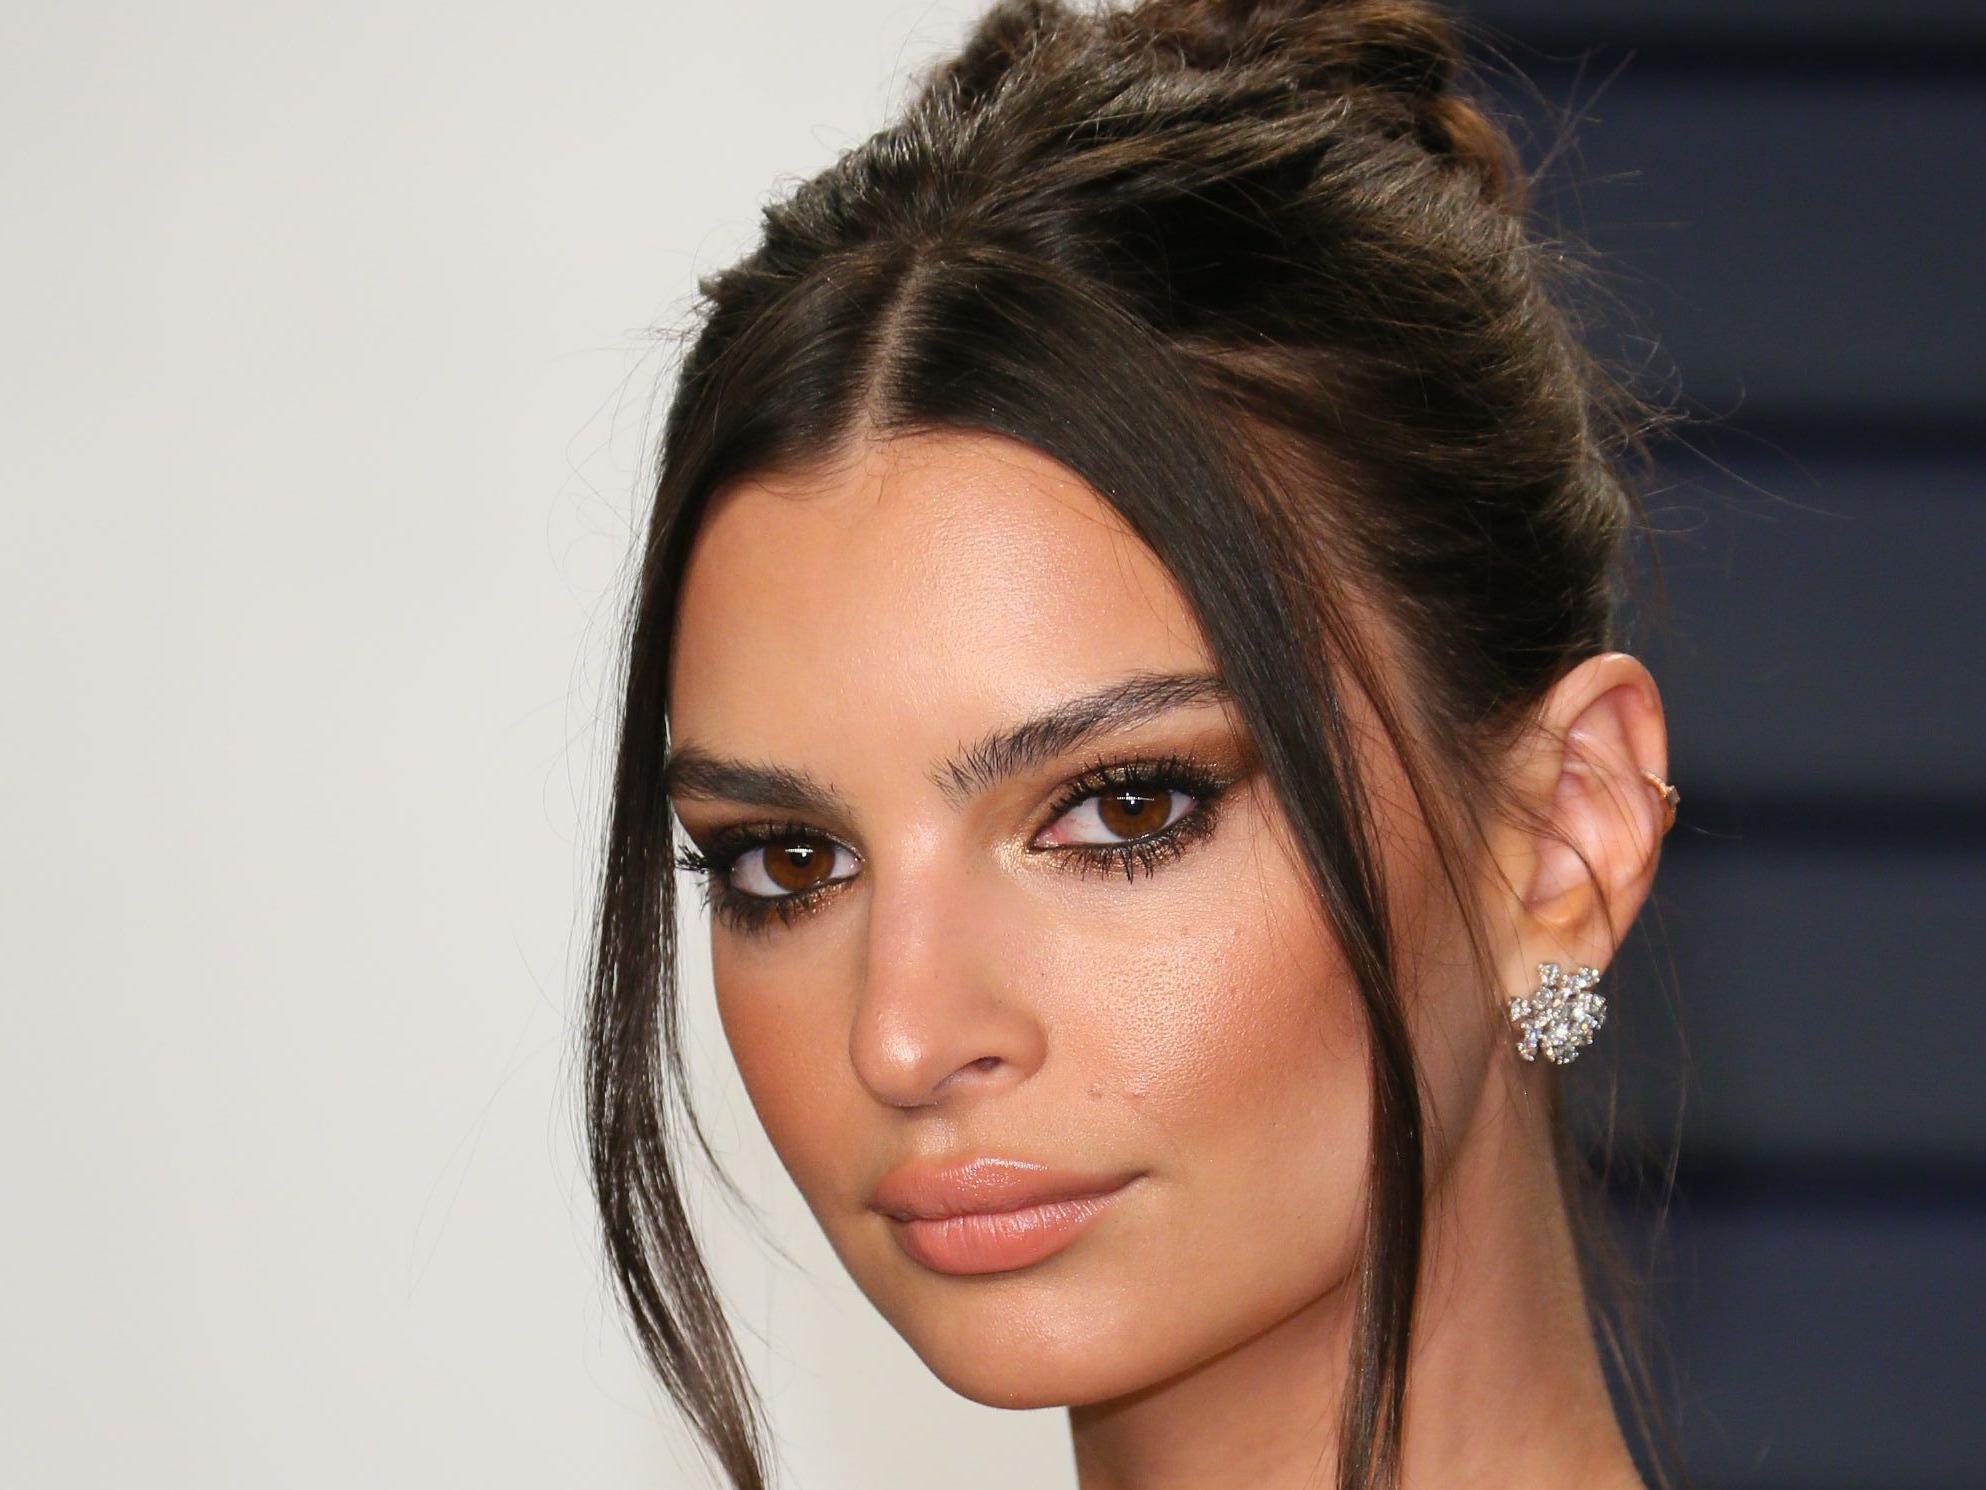 Emily Ratajkowski reveals the cost of becoming a sex symbol in new